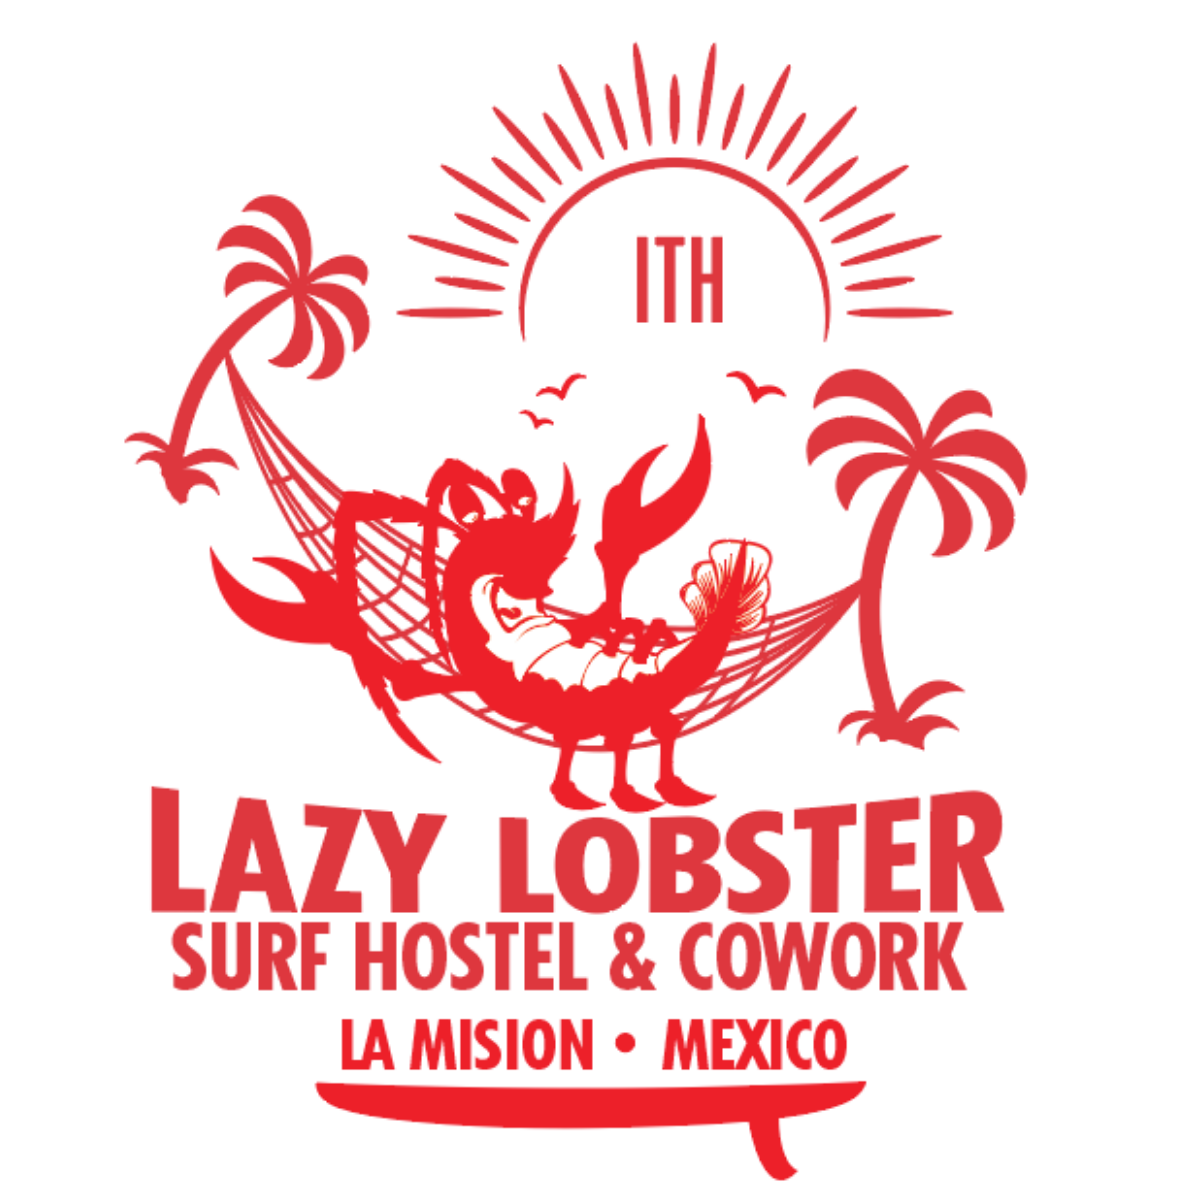 ITH Lazy Lobster Surf Hostel